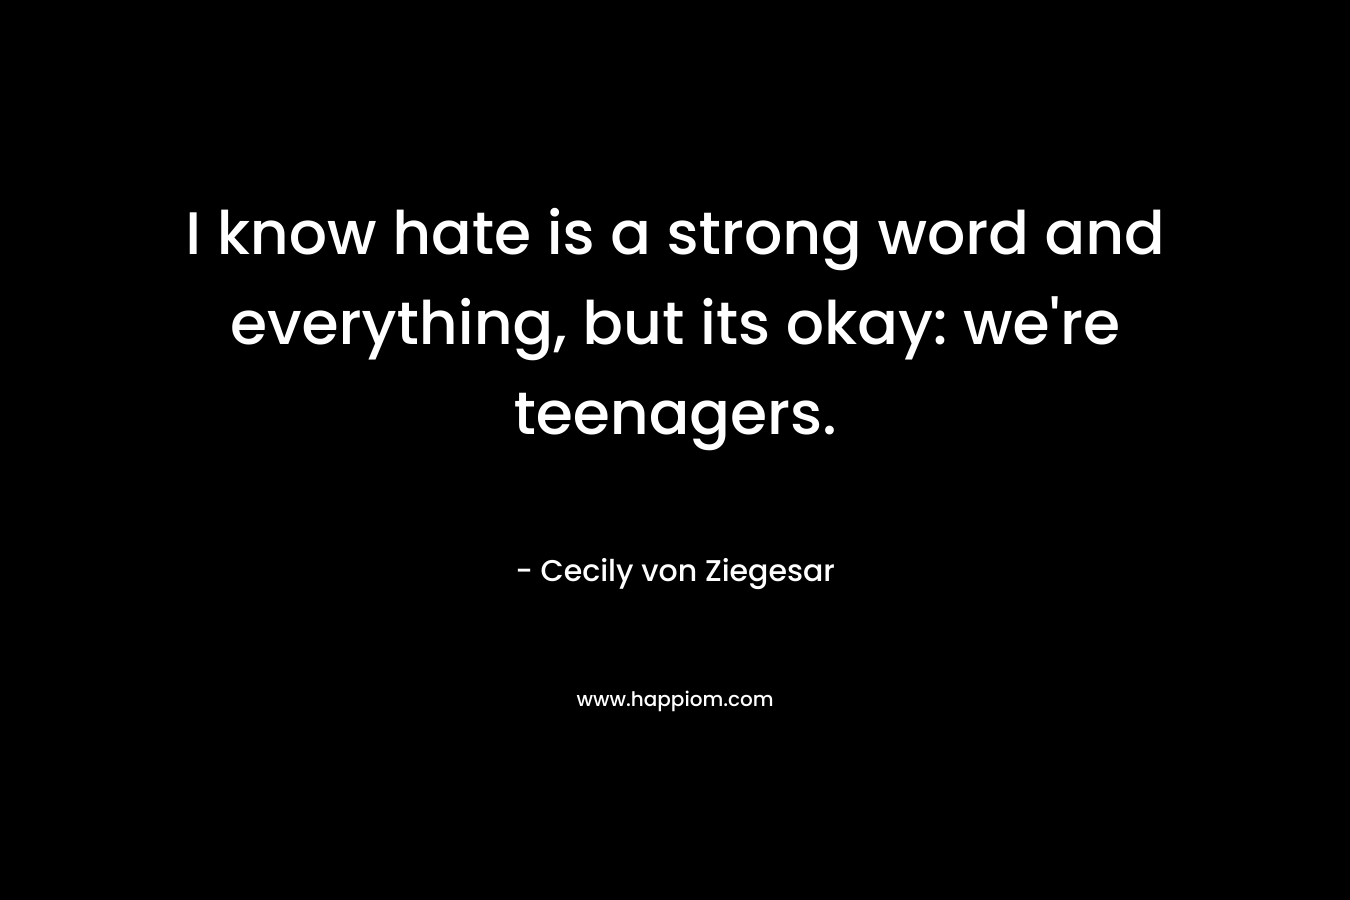 I know hate is a strong word and everything, but its okay: we're teenagers.